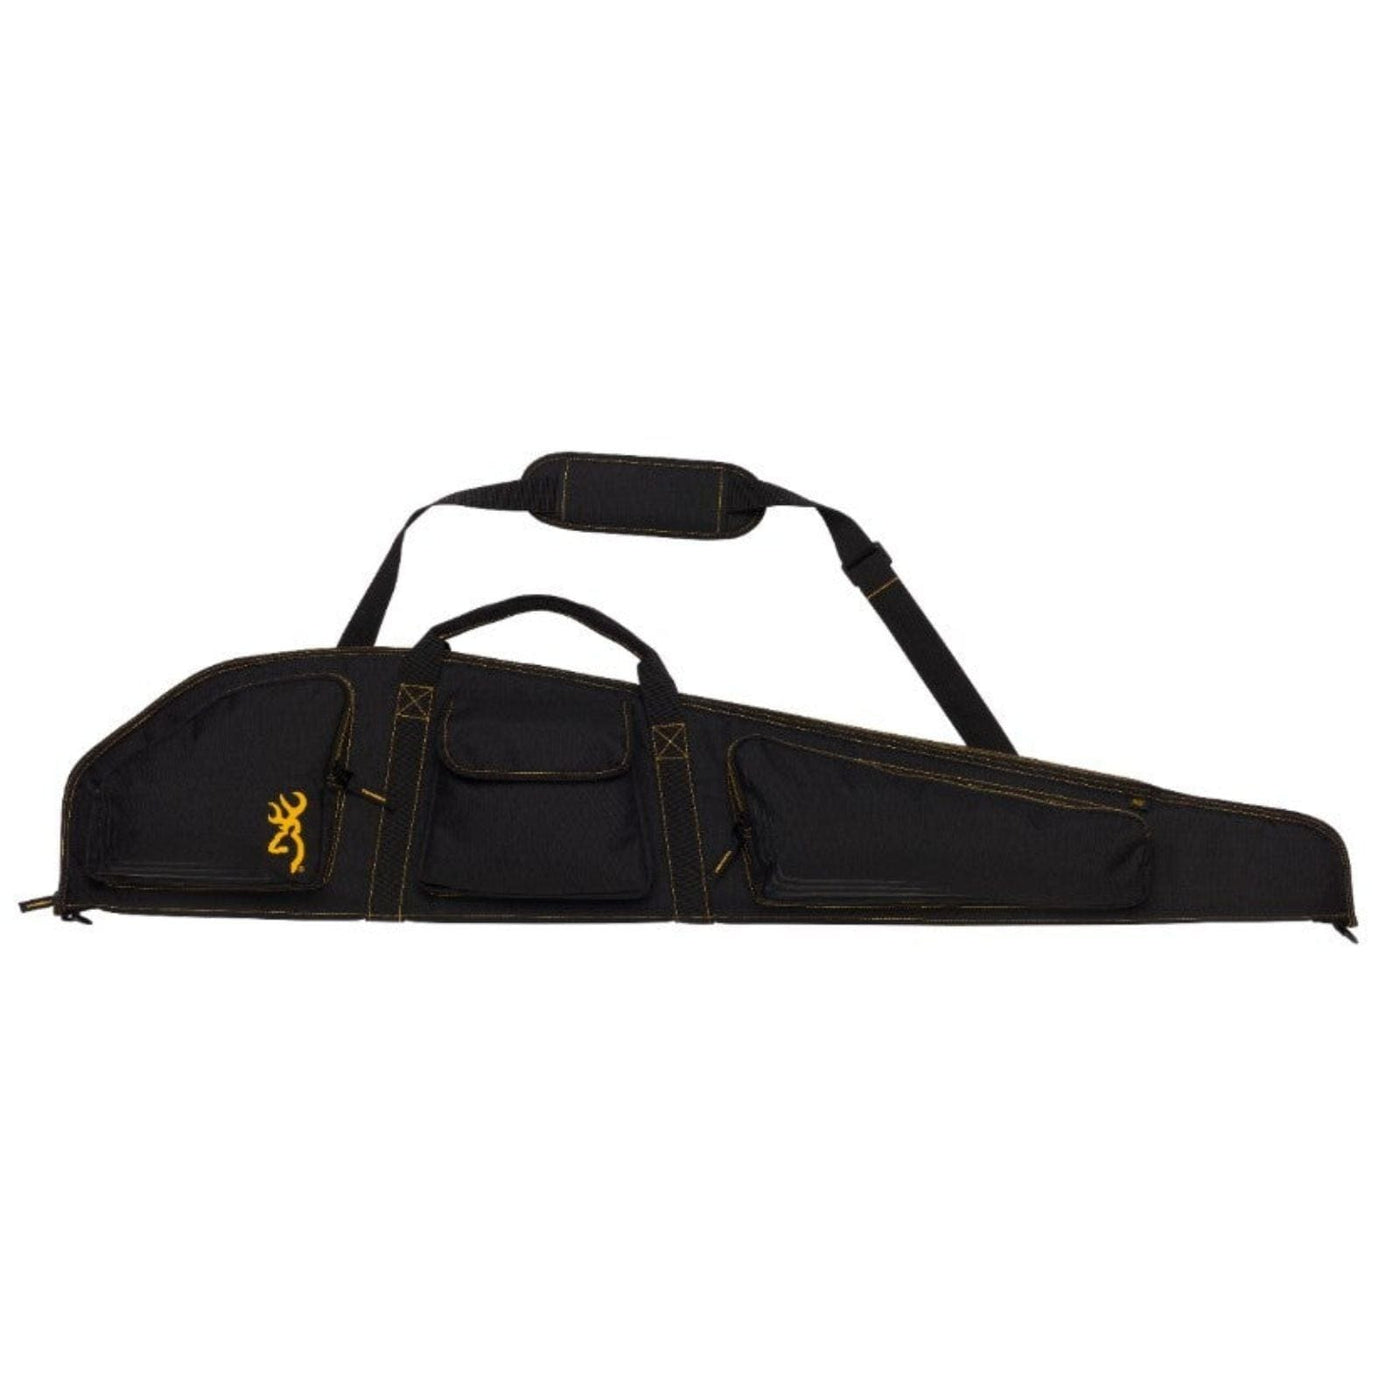 Browning Browning Black and Gold Rifle Case Shooting